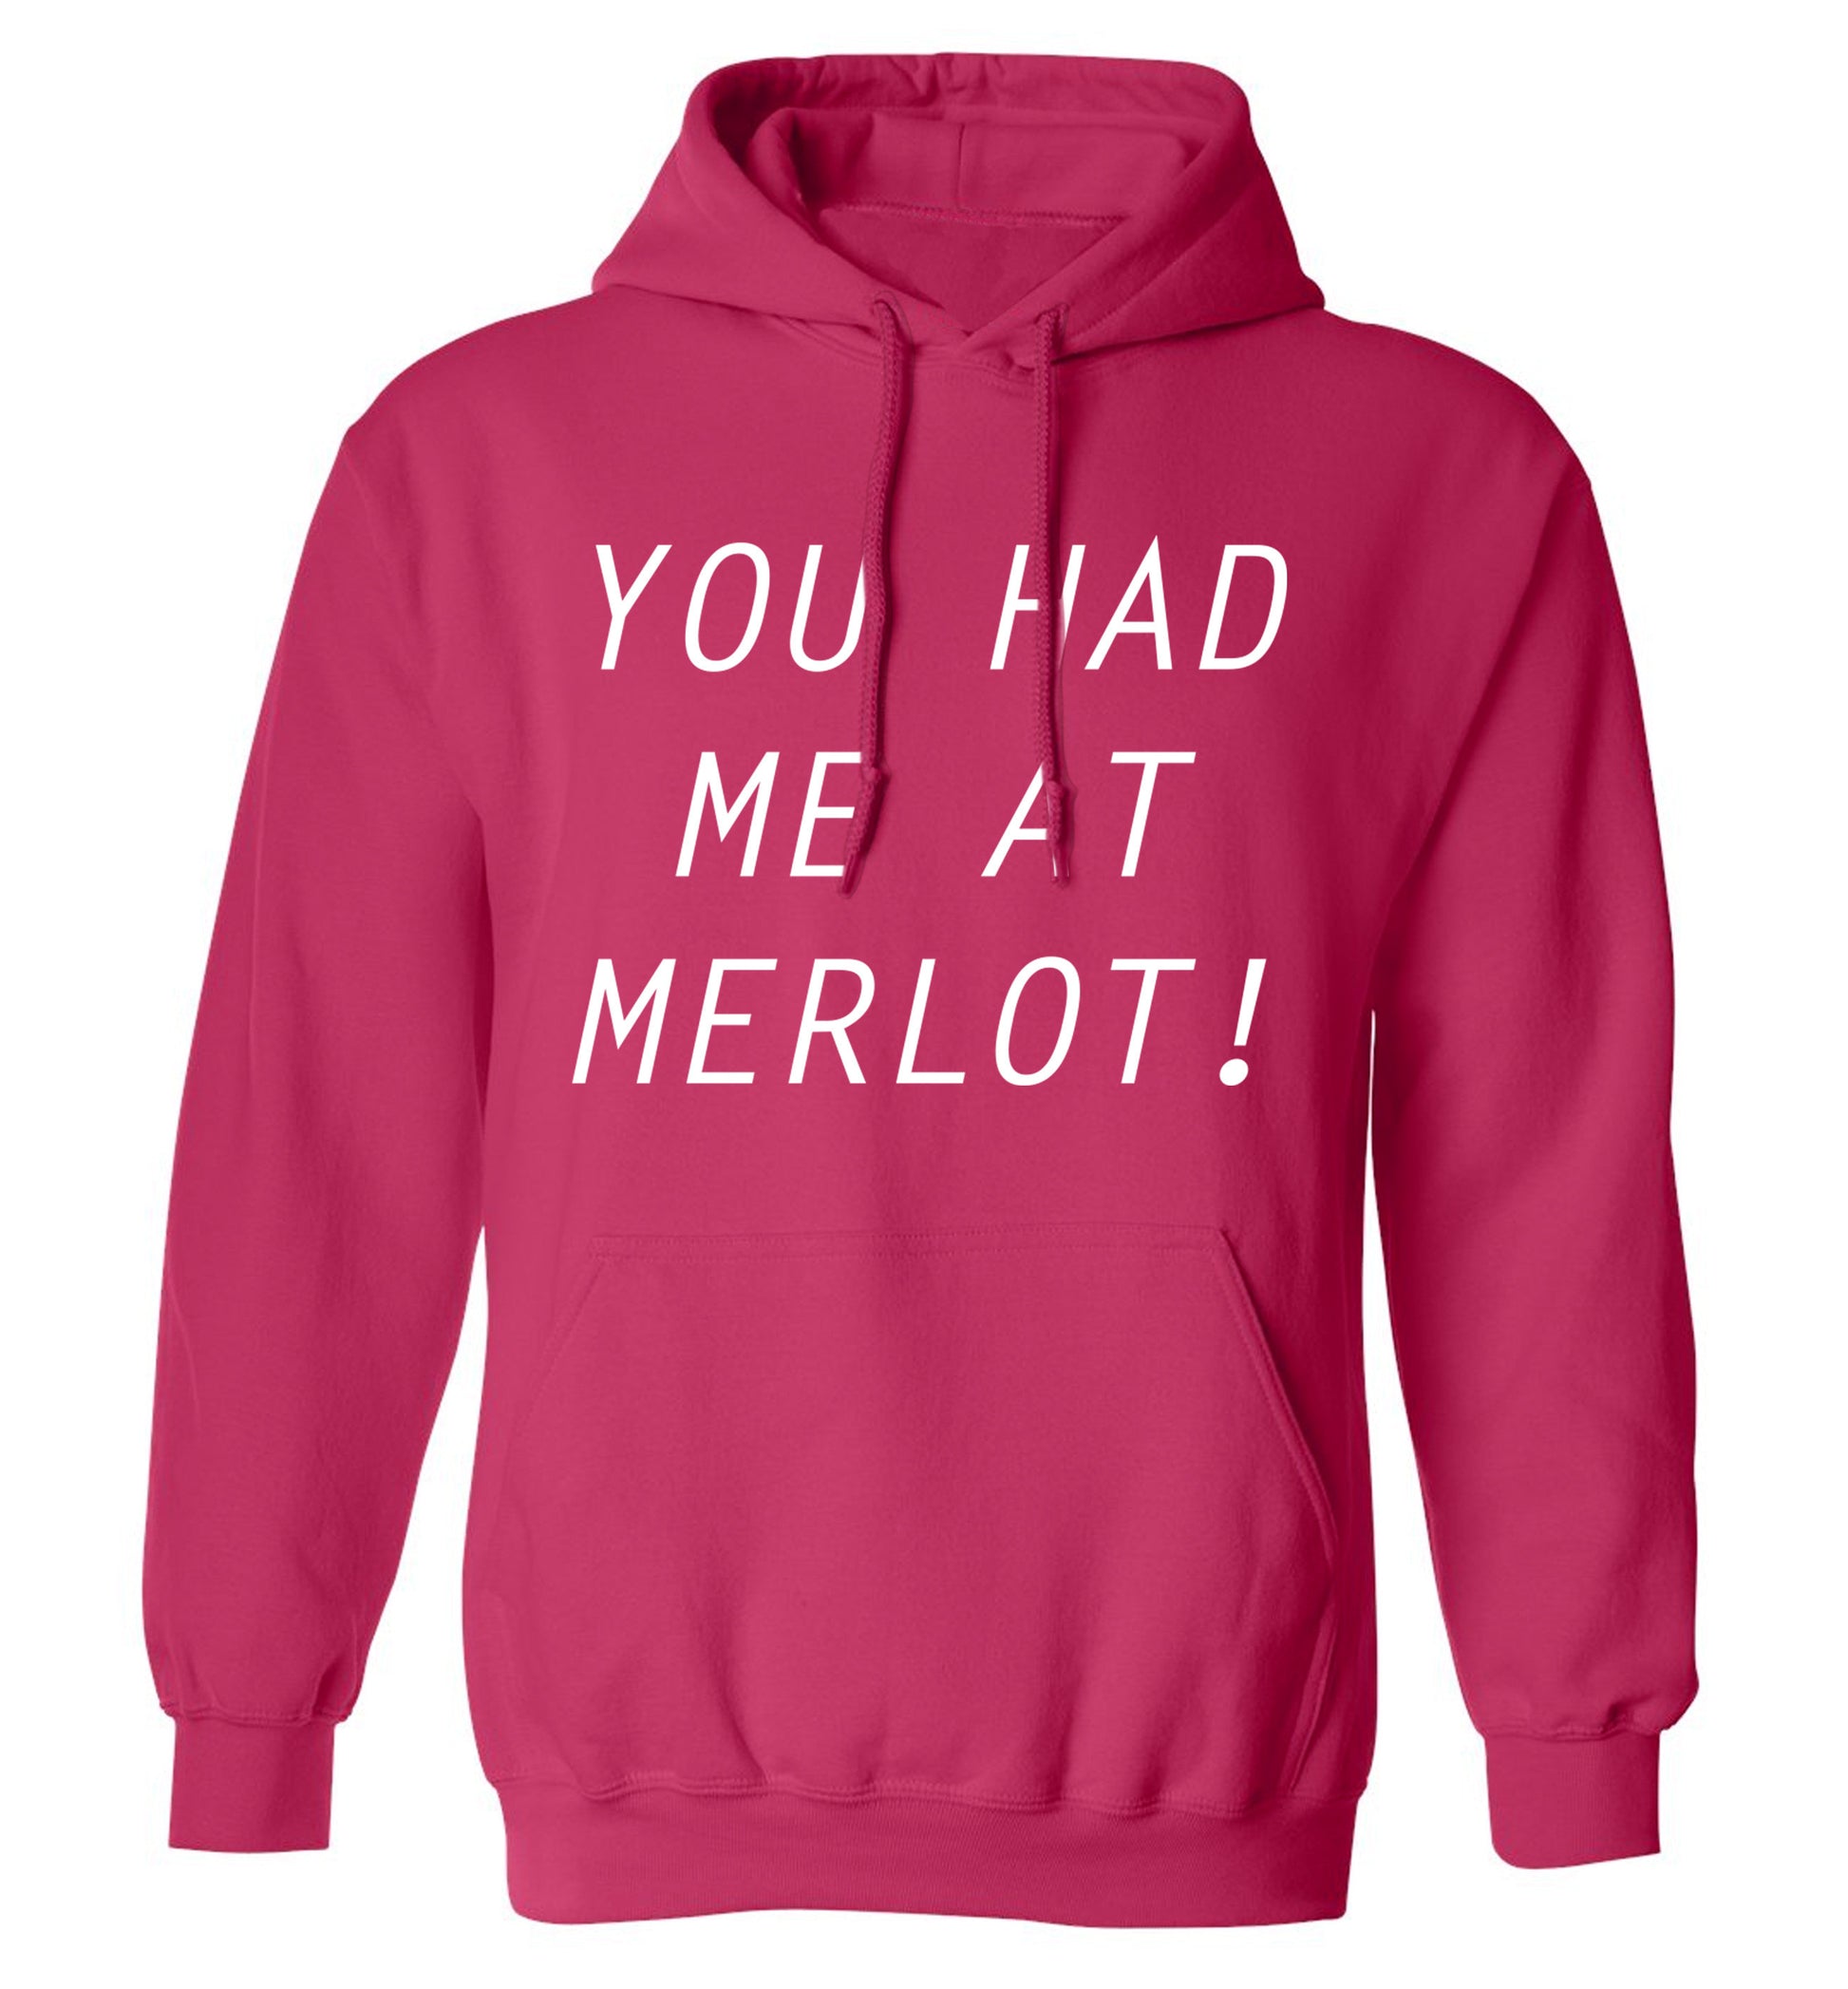 You had me at merlot adults unisex pink hoodie 2XL